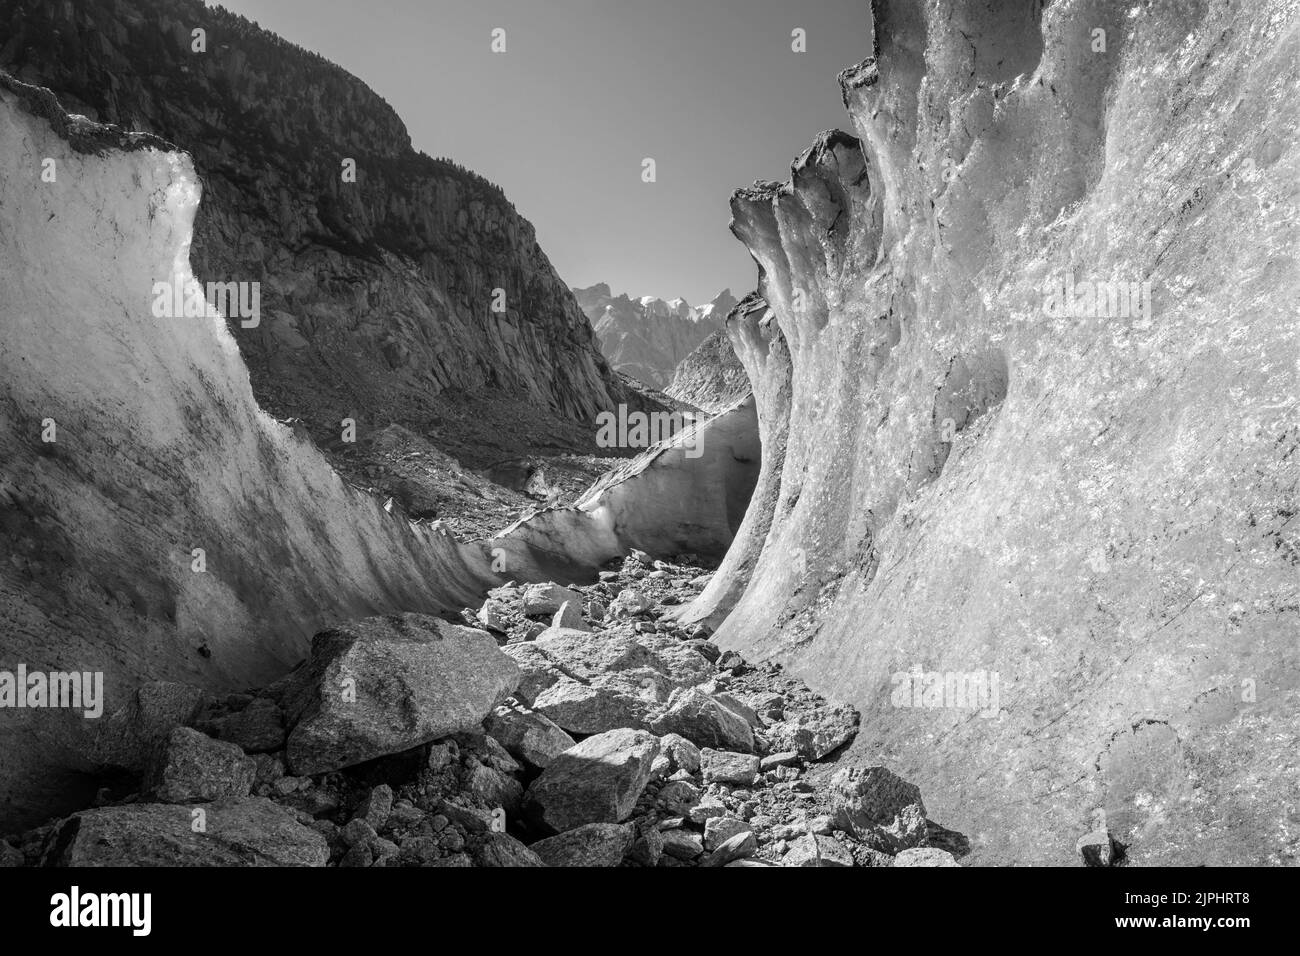 The natural glacial cave the glacier Mer de Glace with the Aiguilles towers in the background. Stock Photo